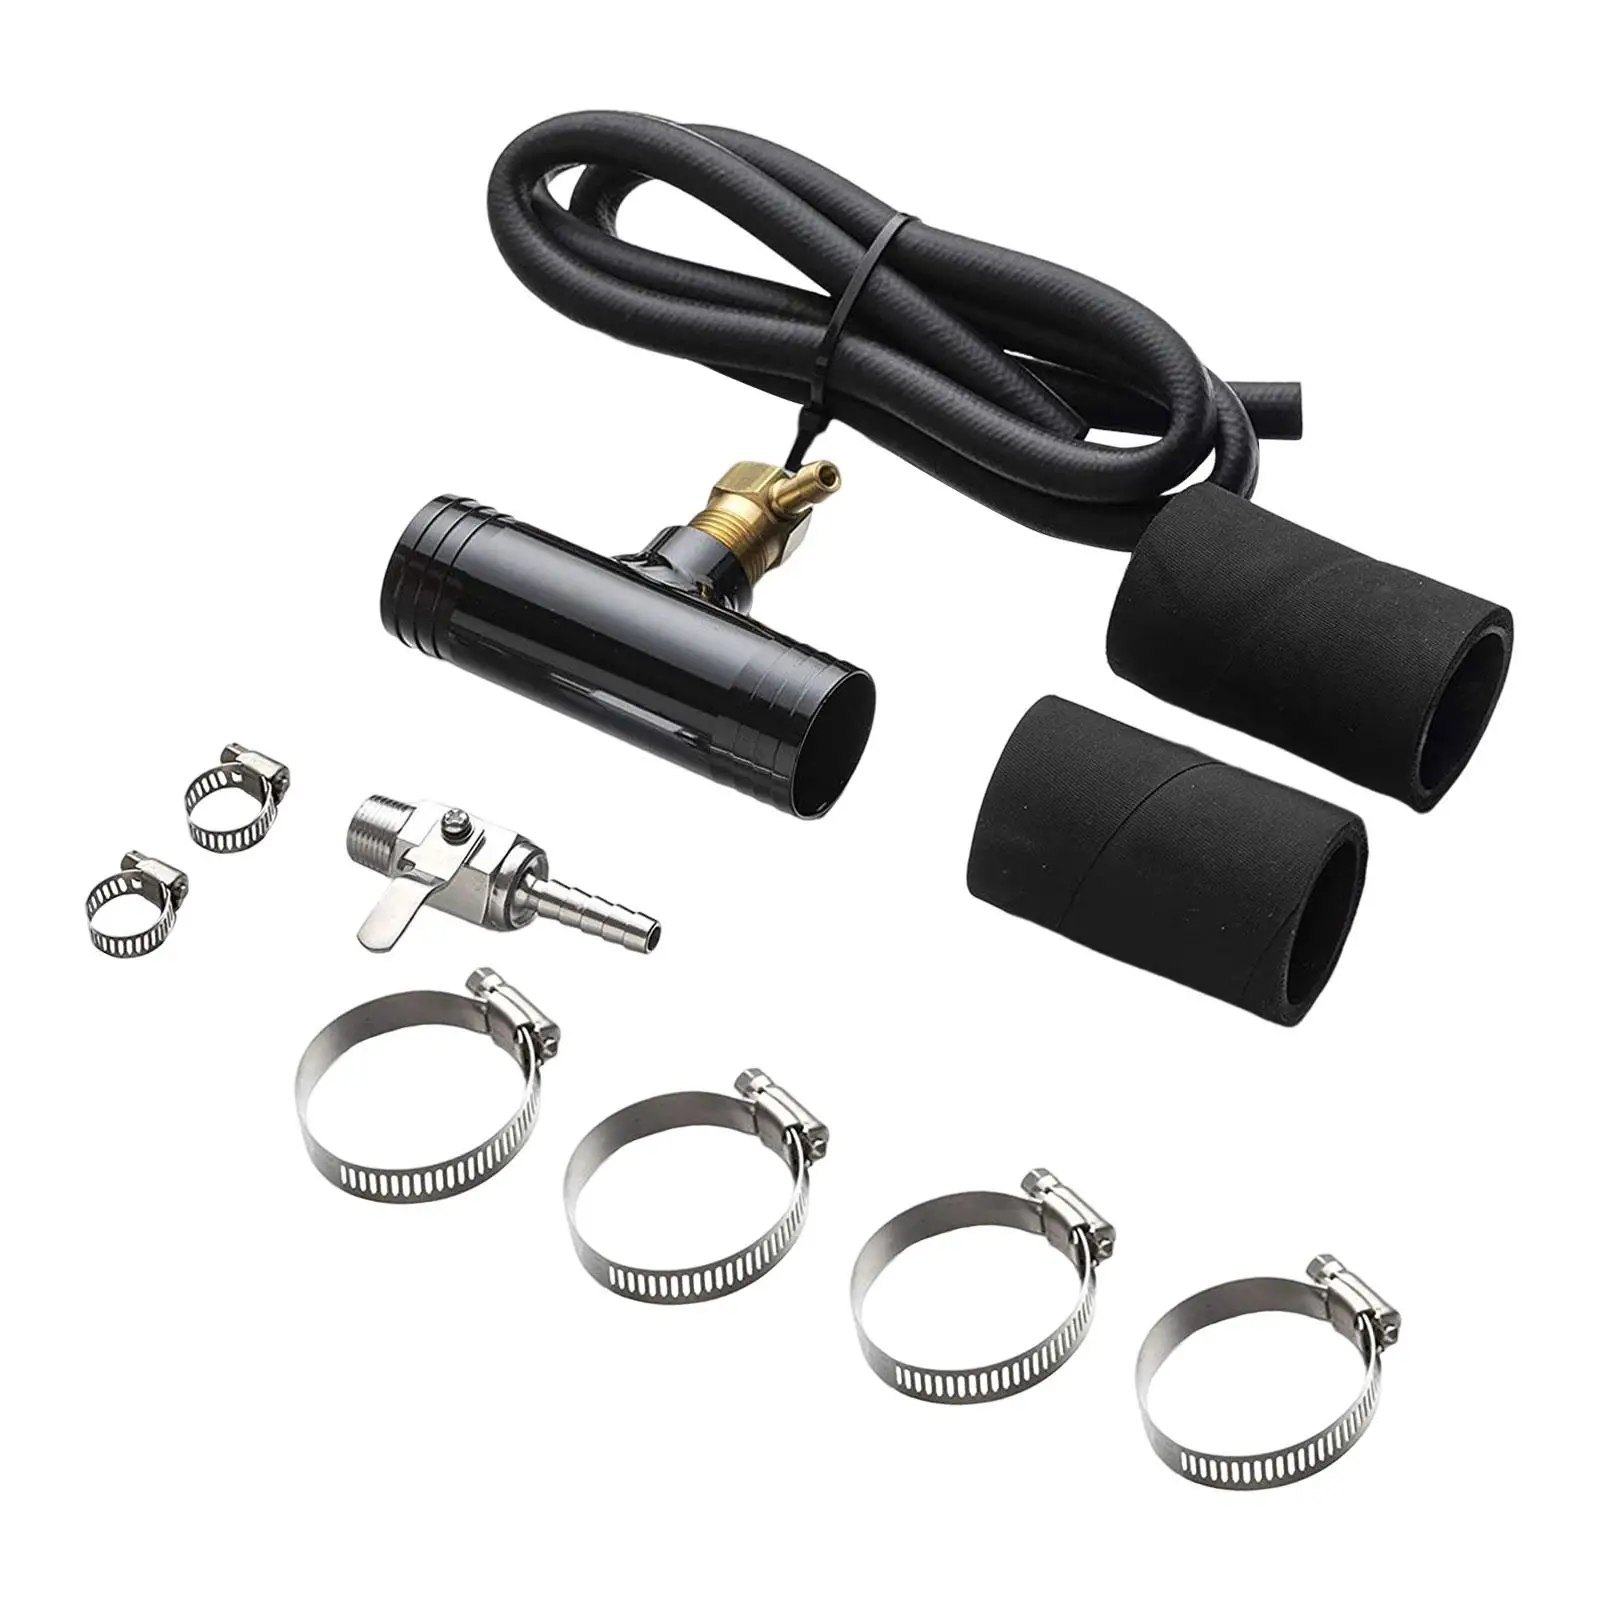 

Diesel Installation Kit 11025 1 1/2" Auxiliary Fuel Tank Install Kit for Ford